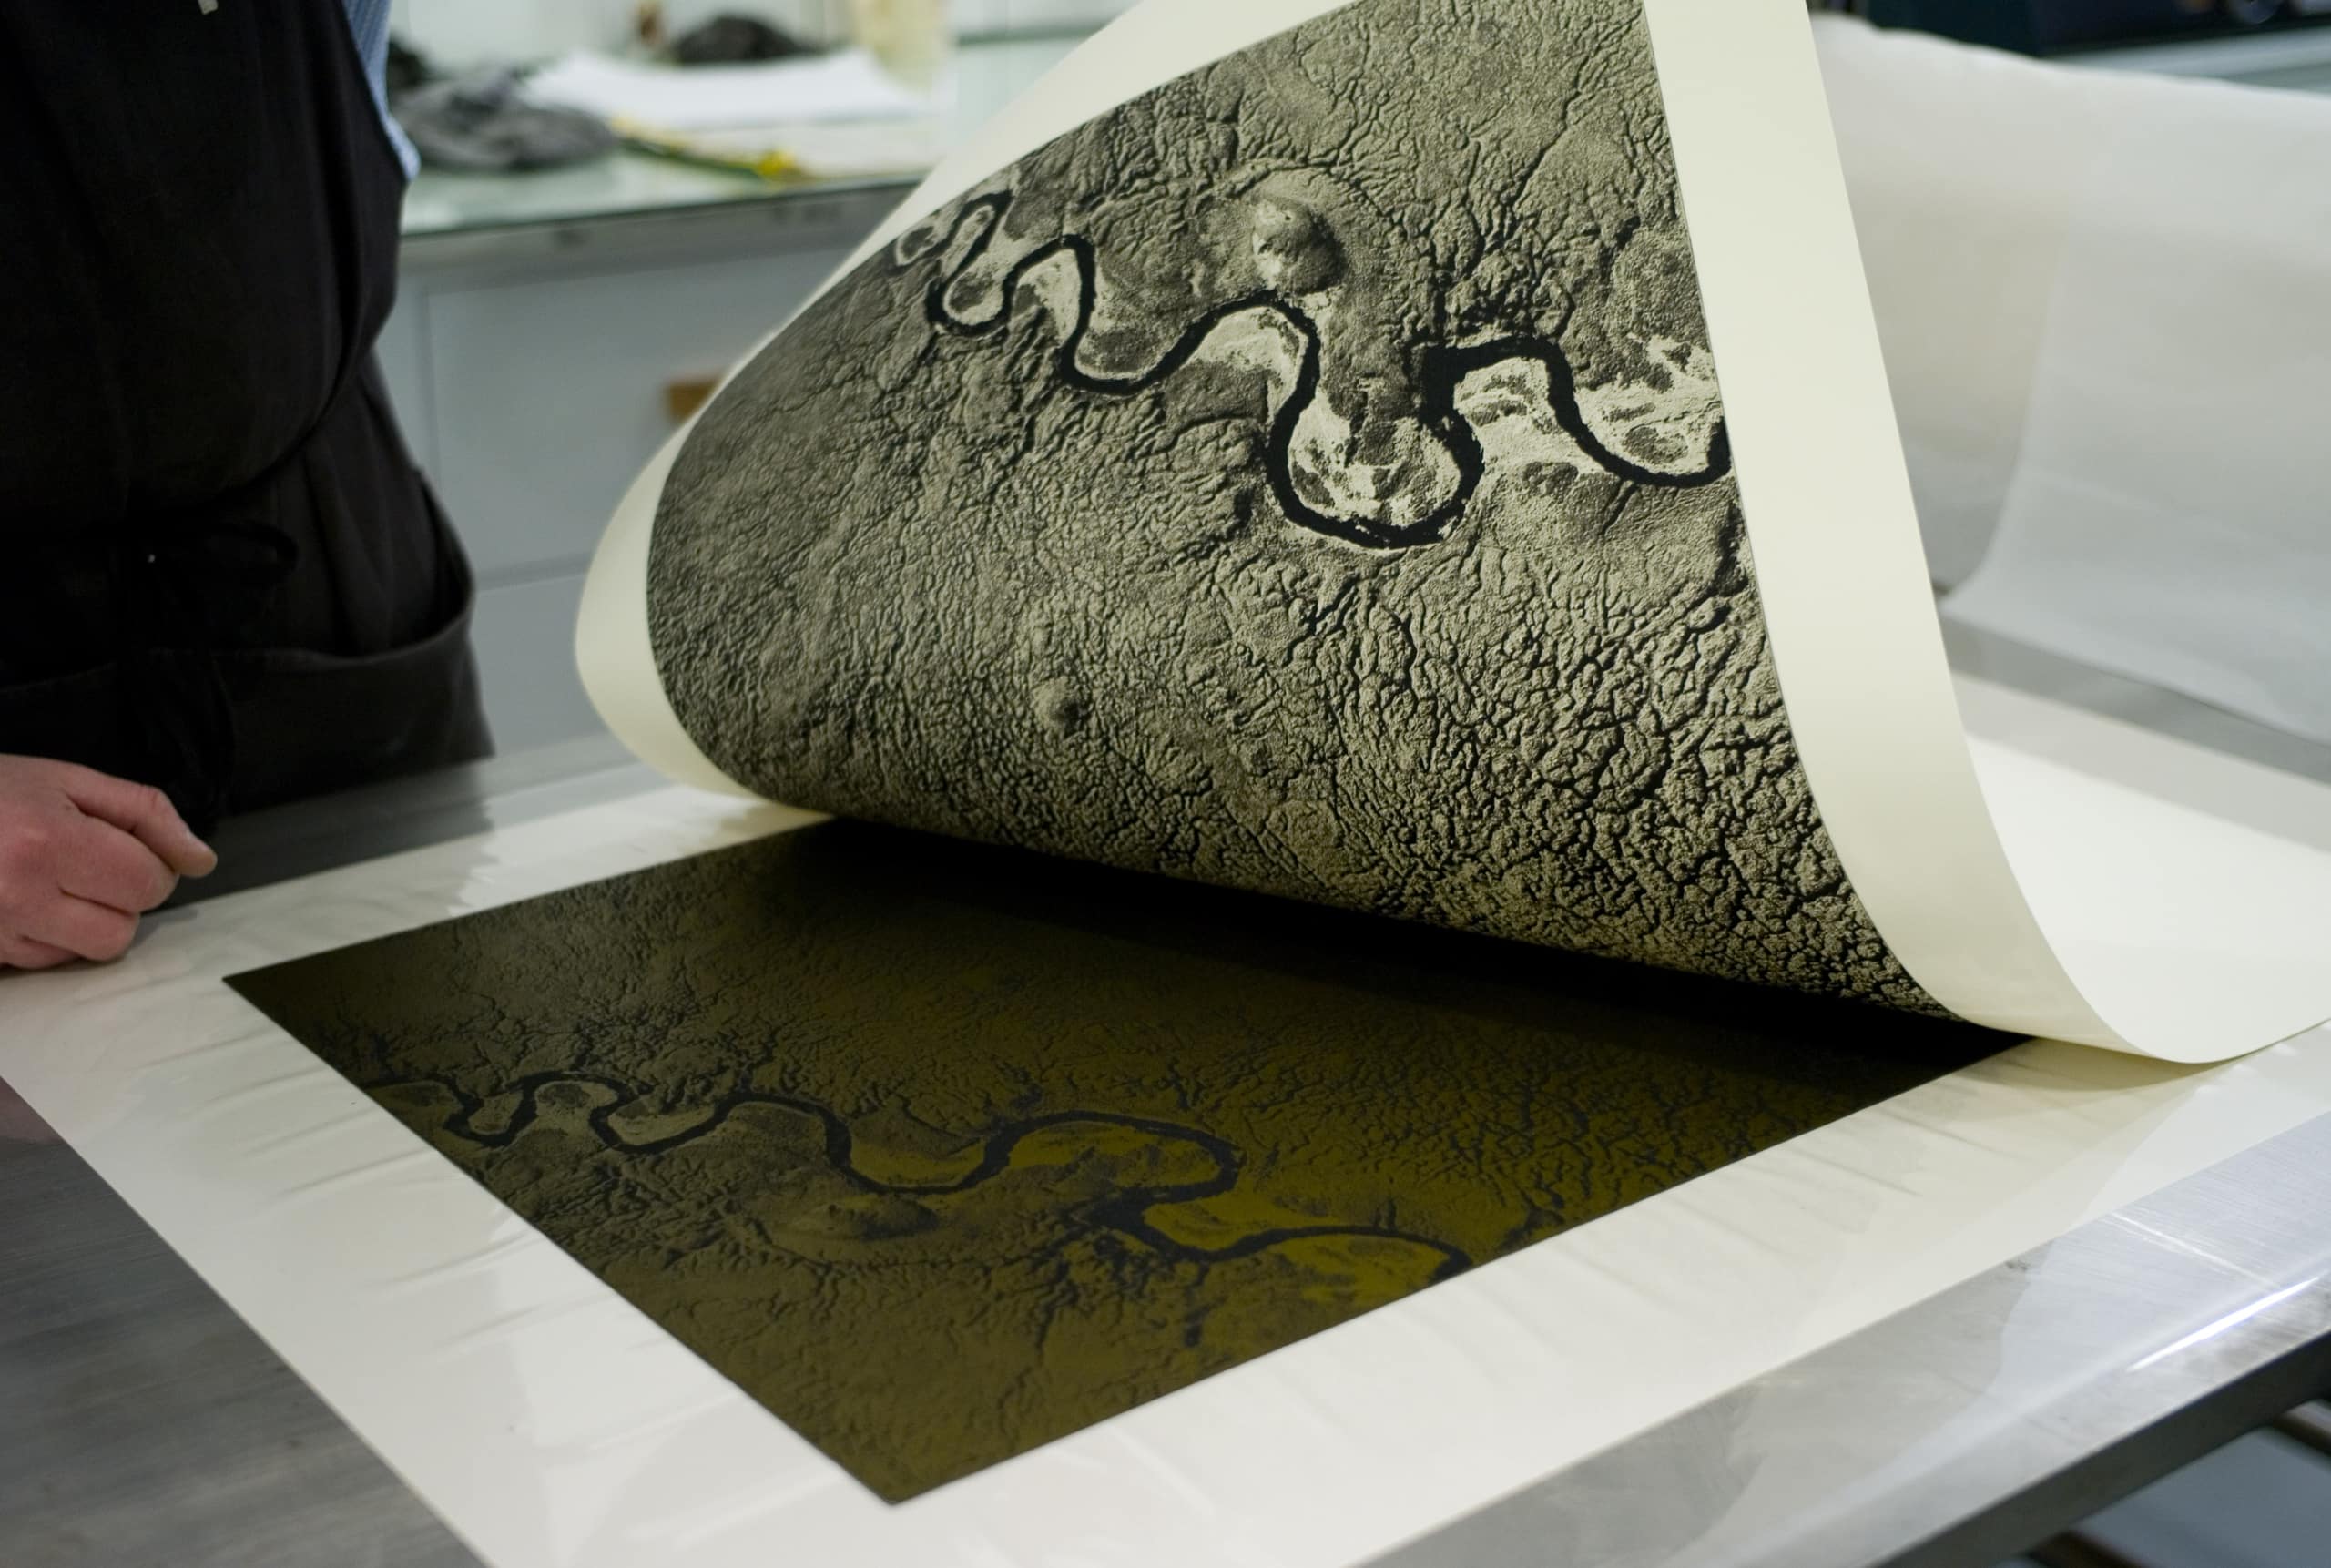 The finished polymer photogravure print being removed from plate, with the fresh print being exposed